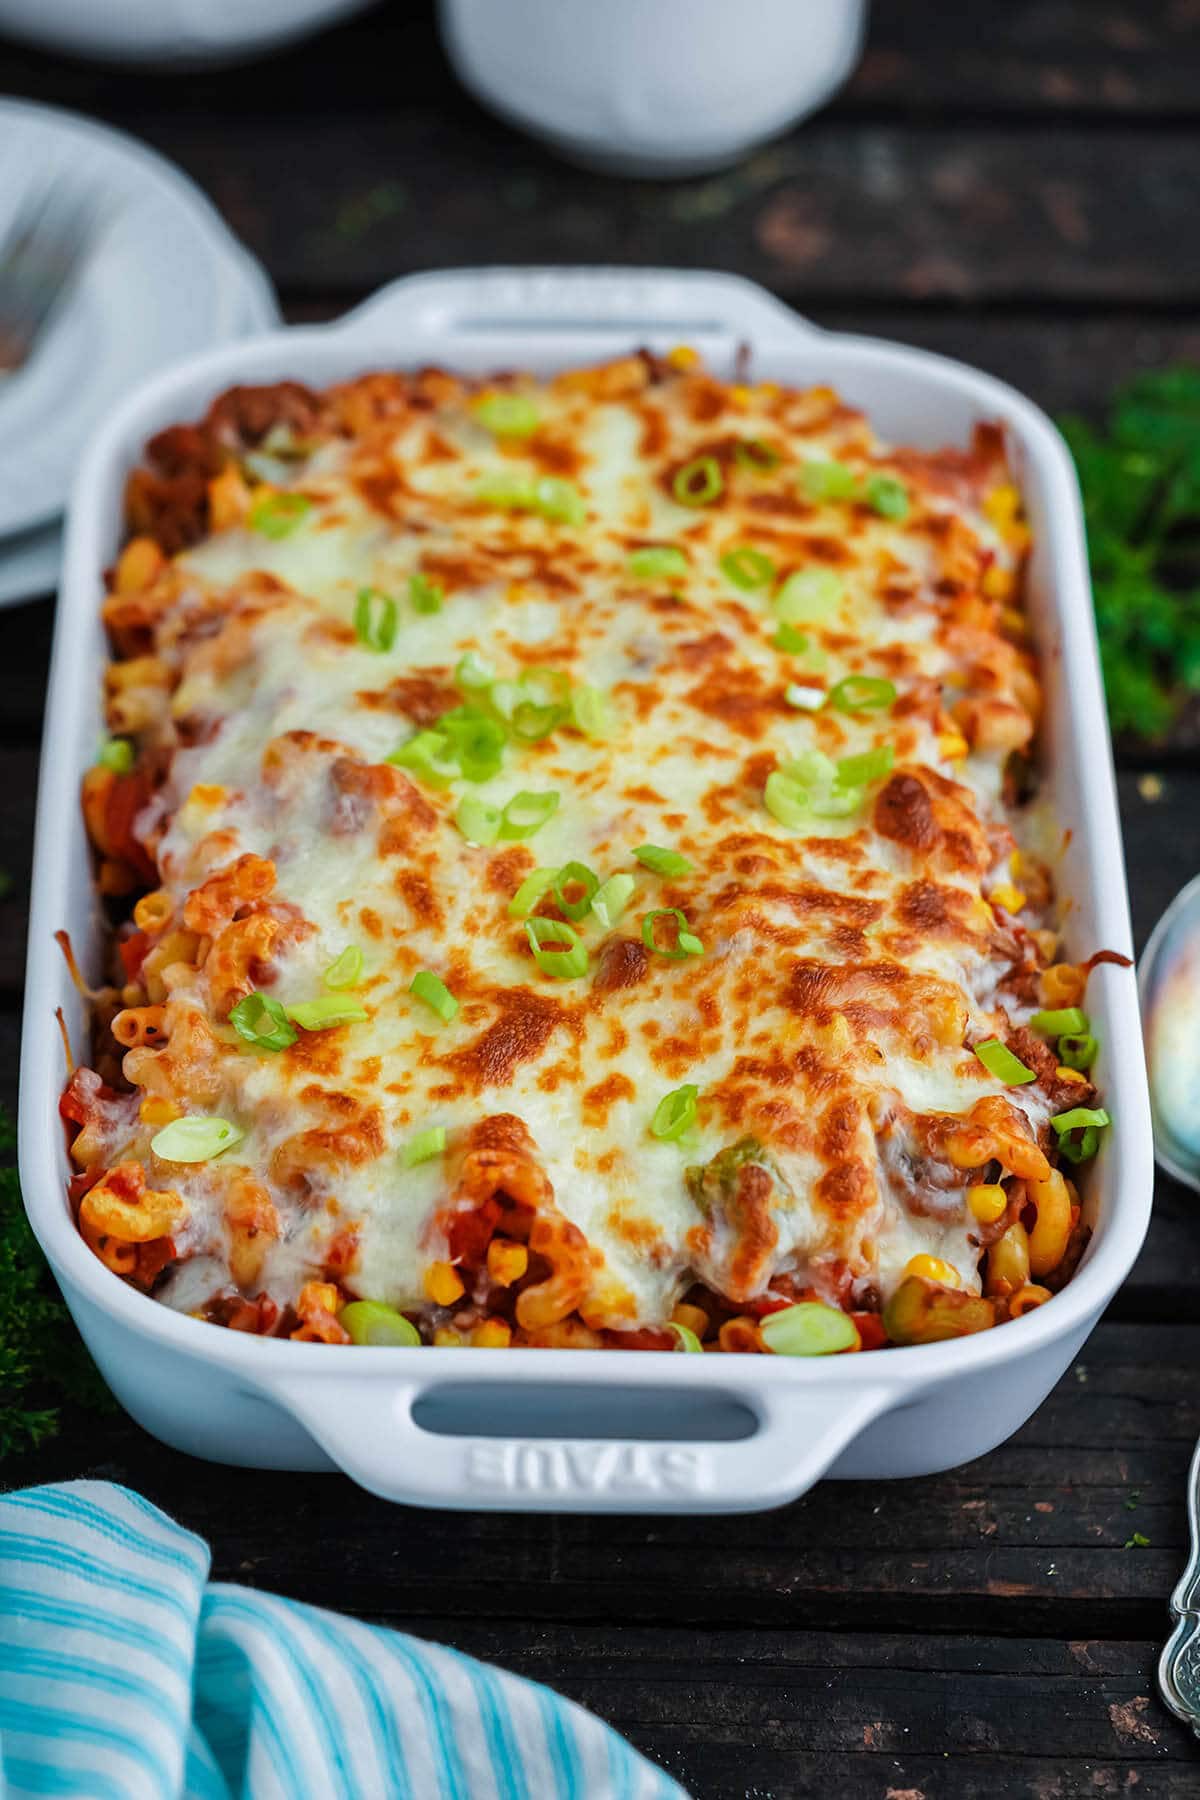 Cooked casserole in baking dish with cheesy topping.